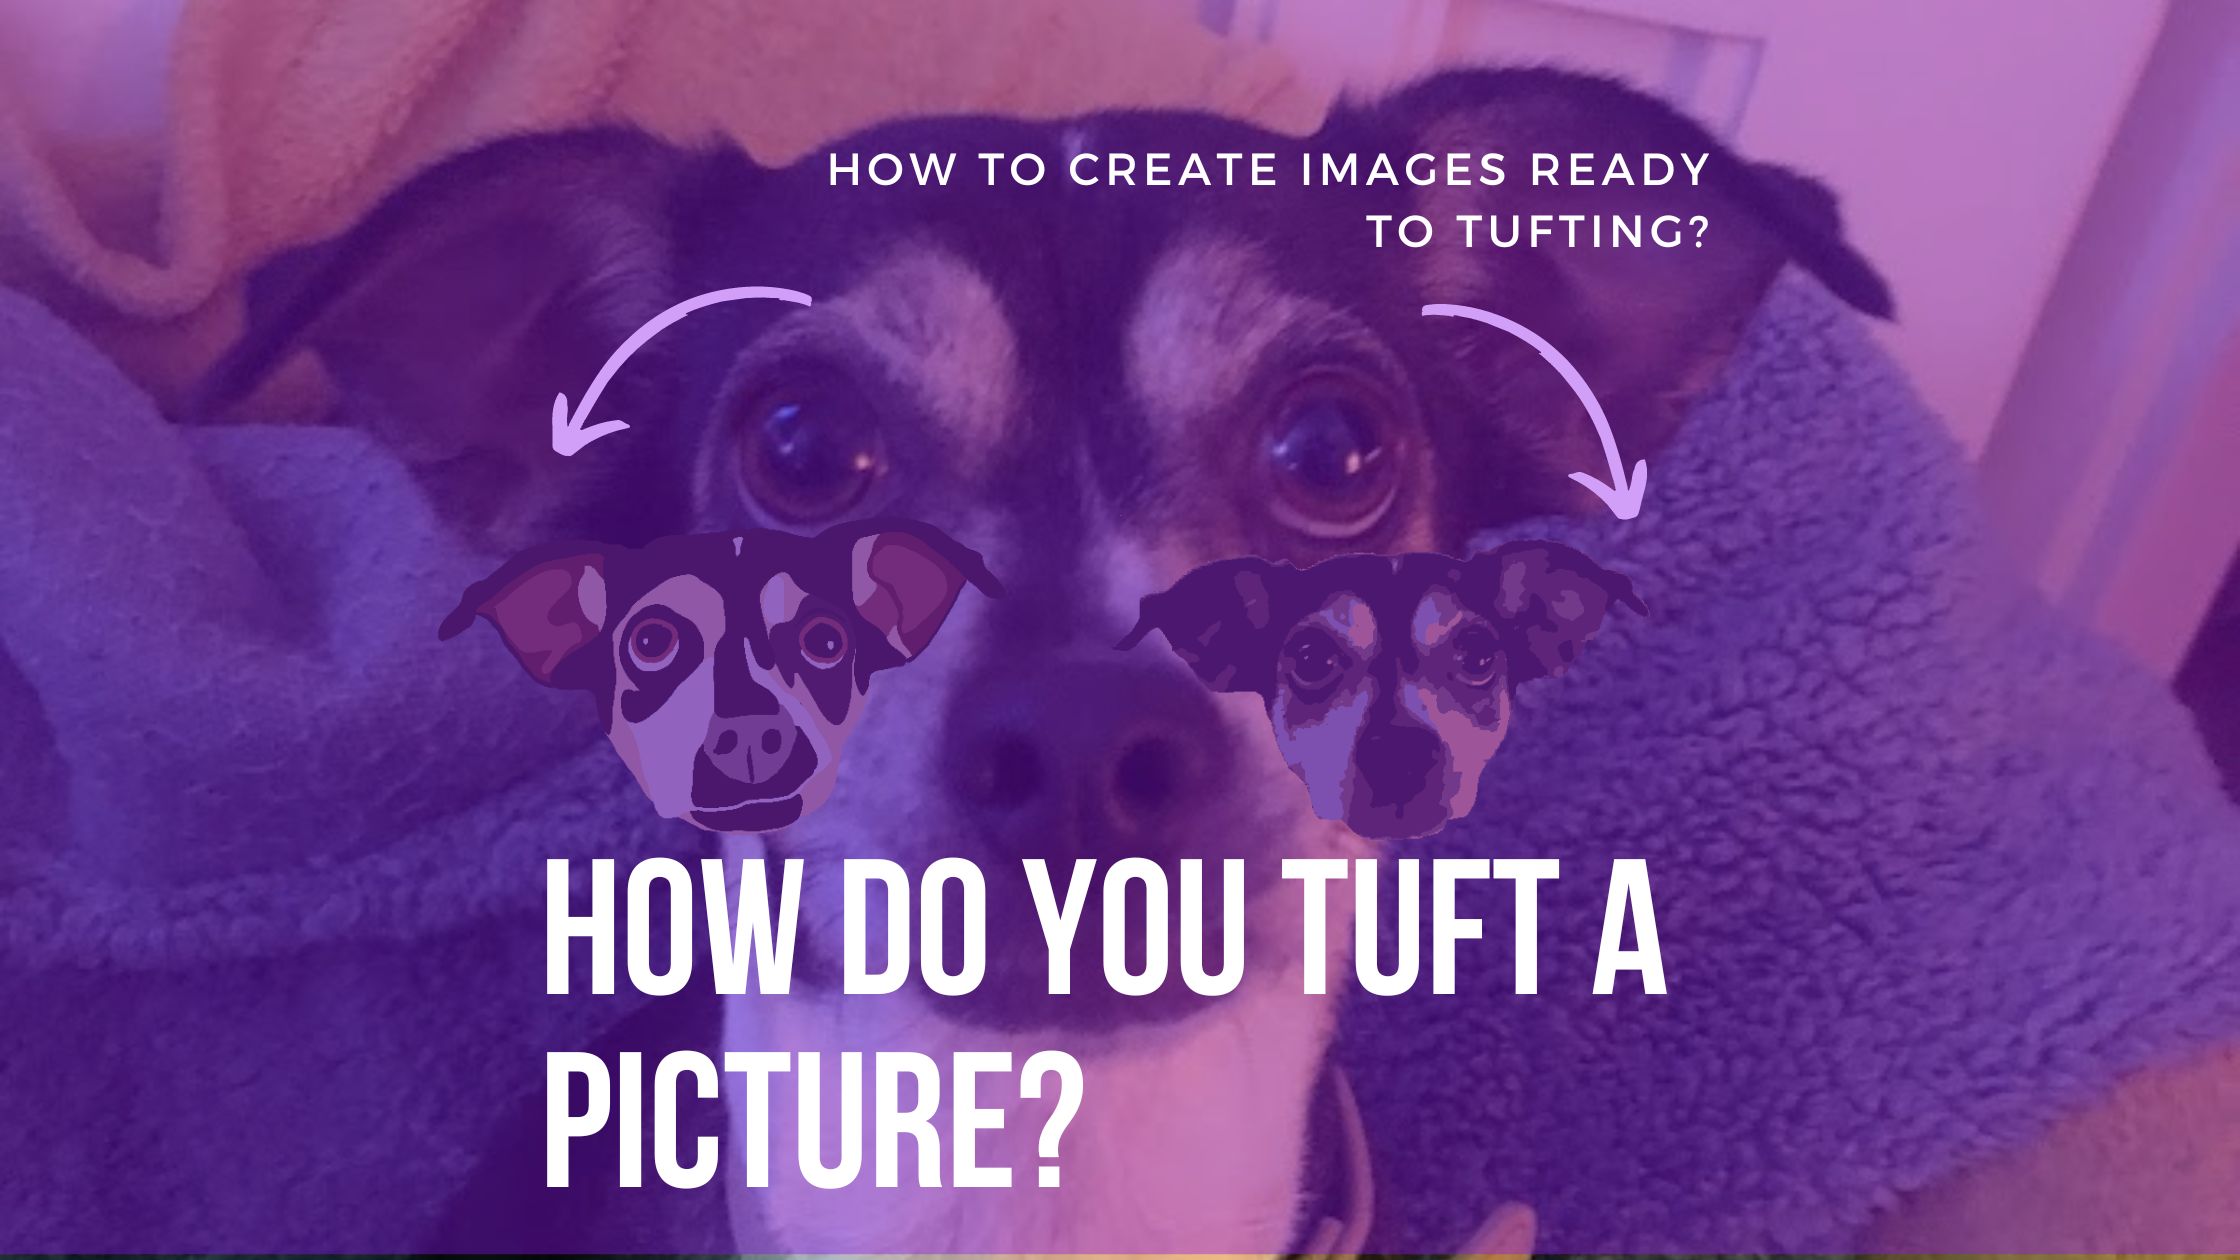 How do you tuft a picture?